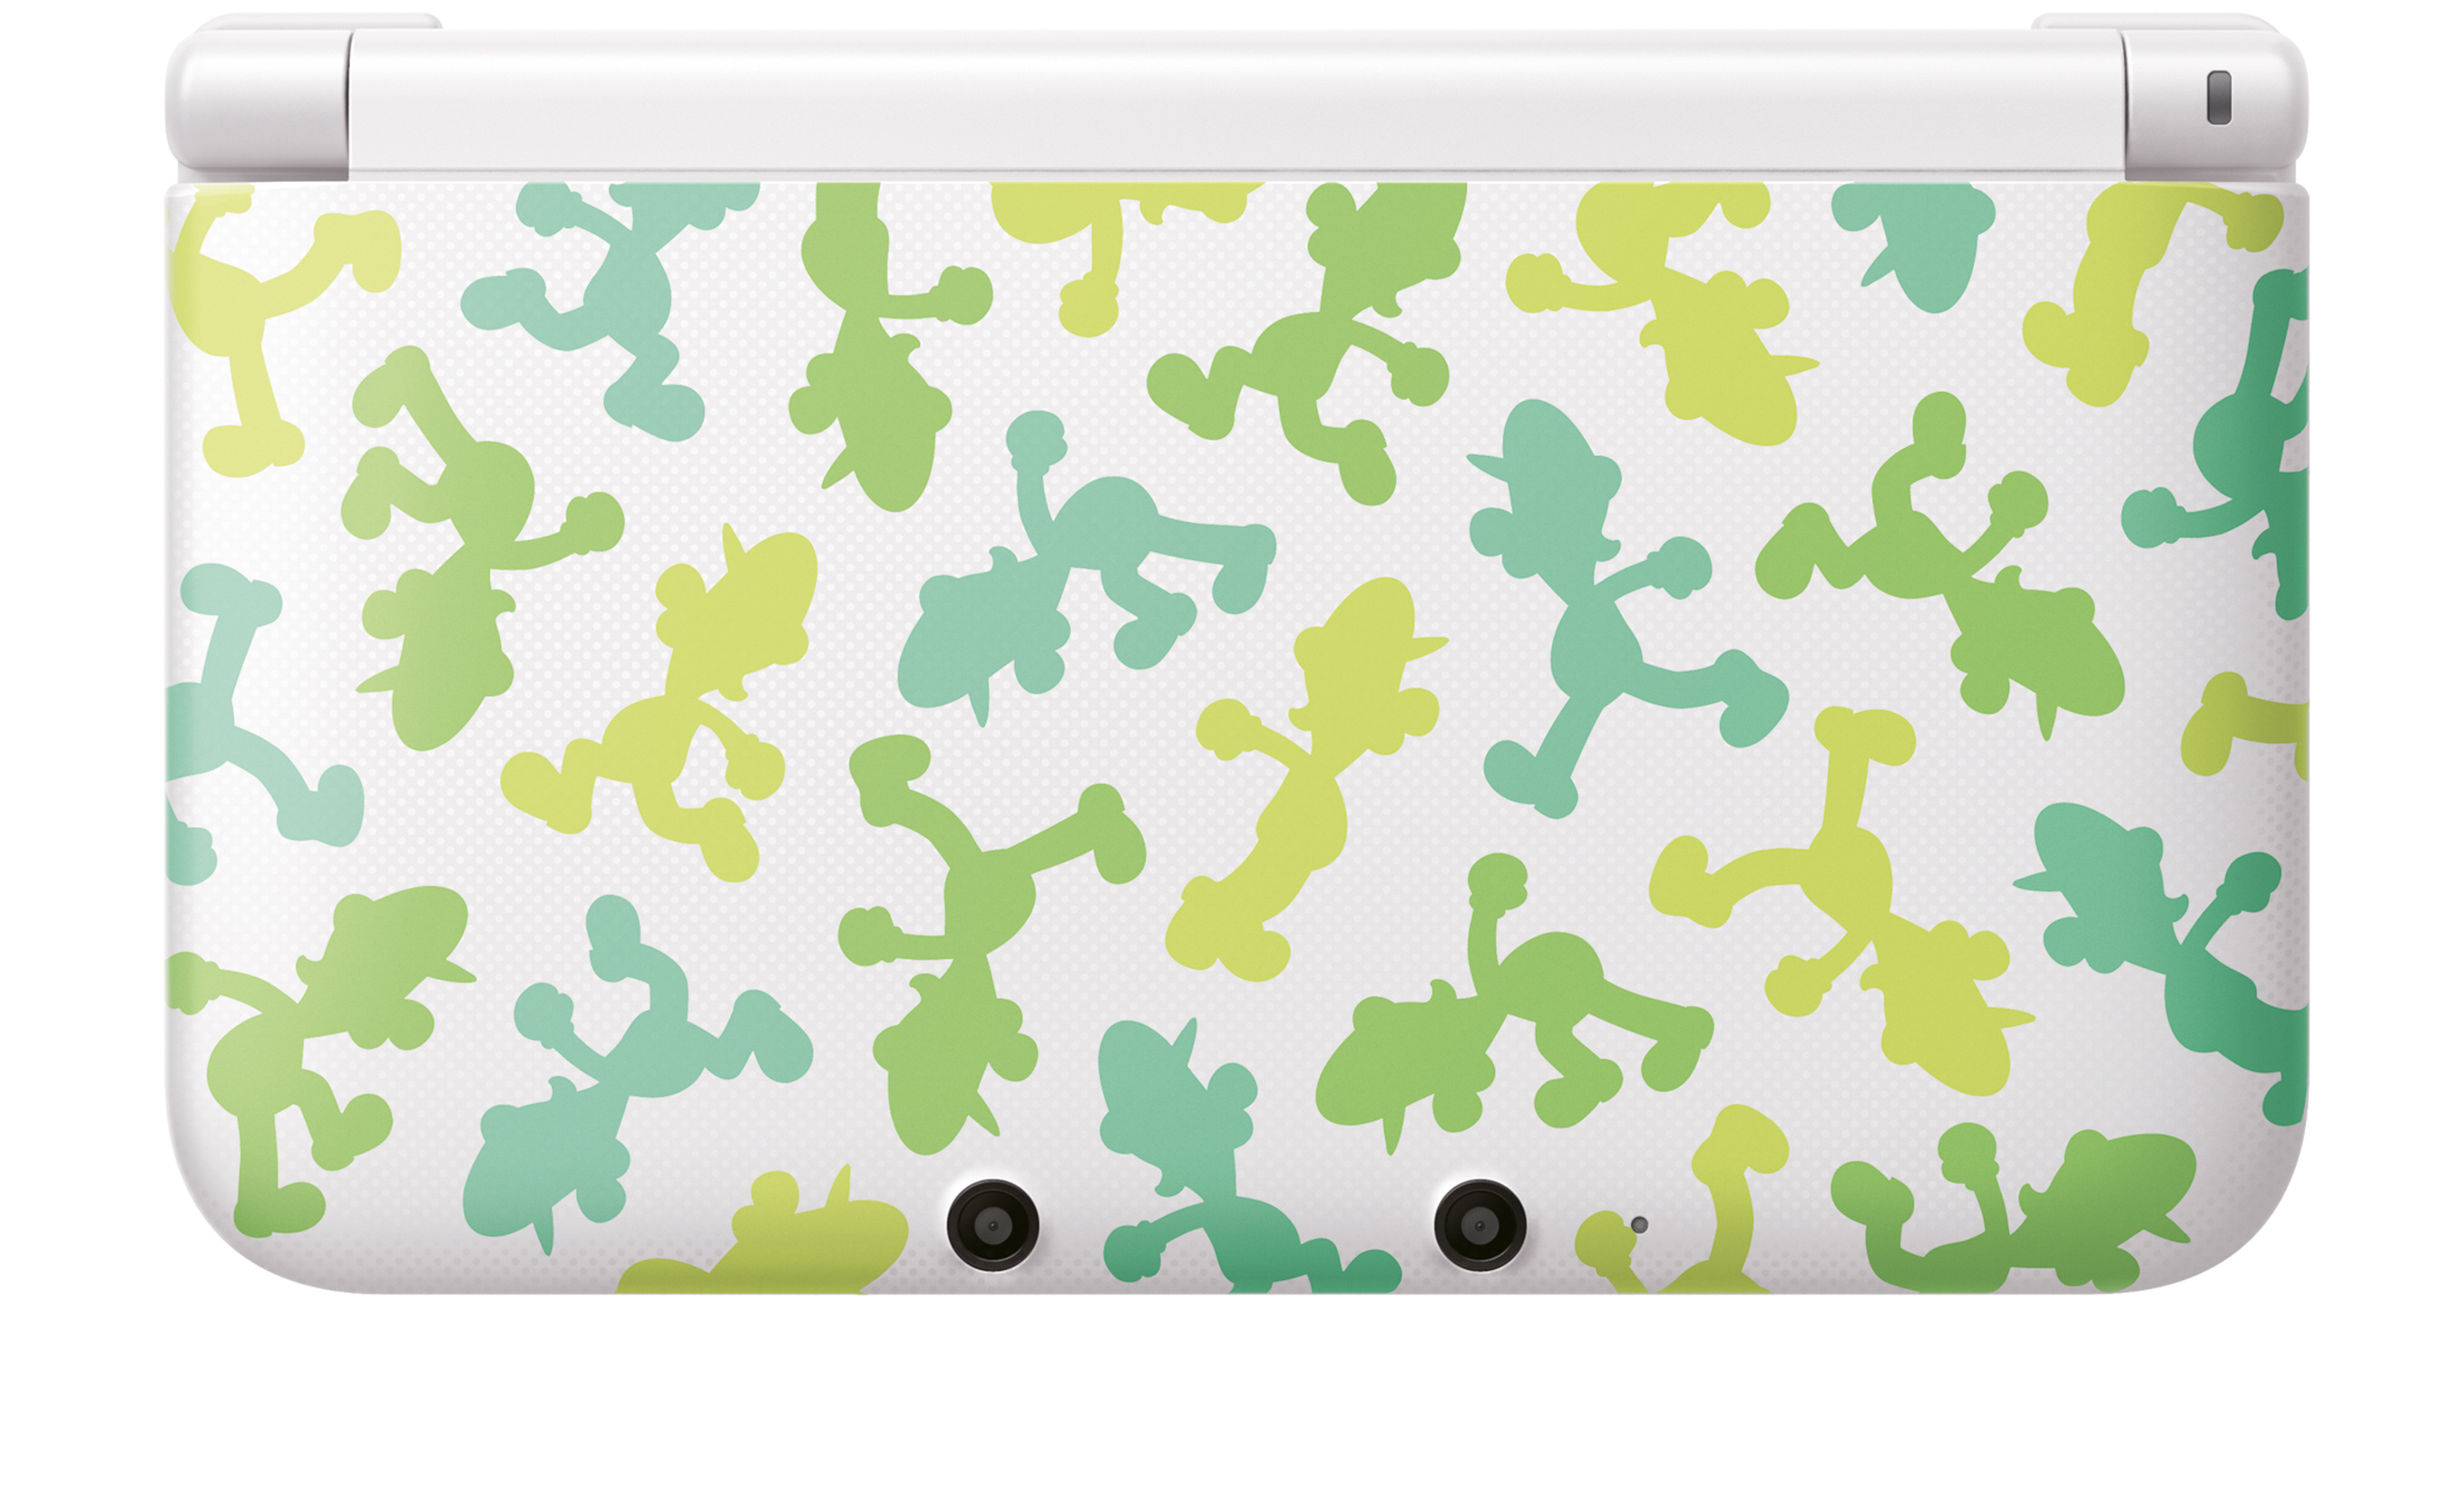 Go Green With The Luigi Special Edition 3ds Xl Available In The Uk Today Nintendo Life